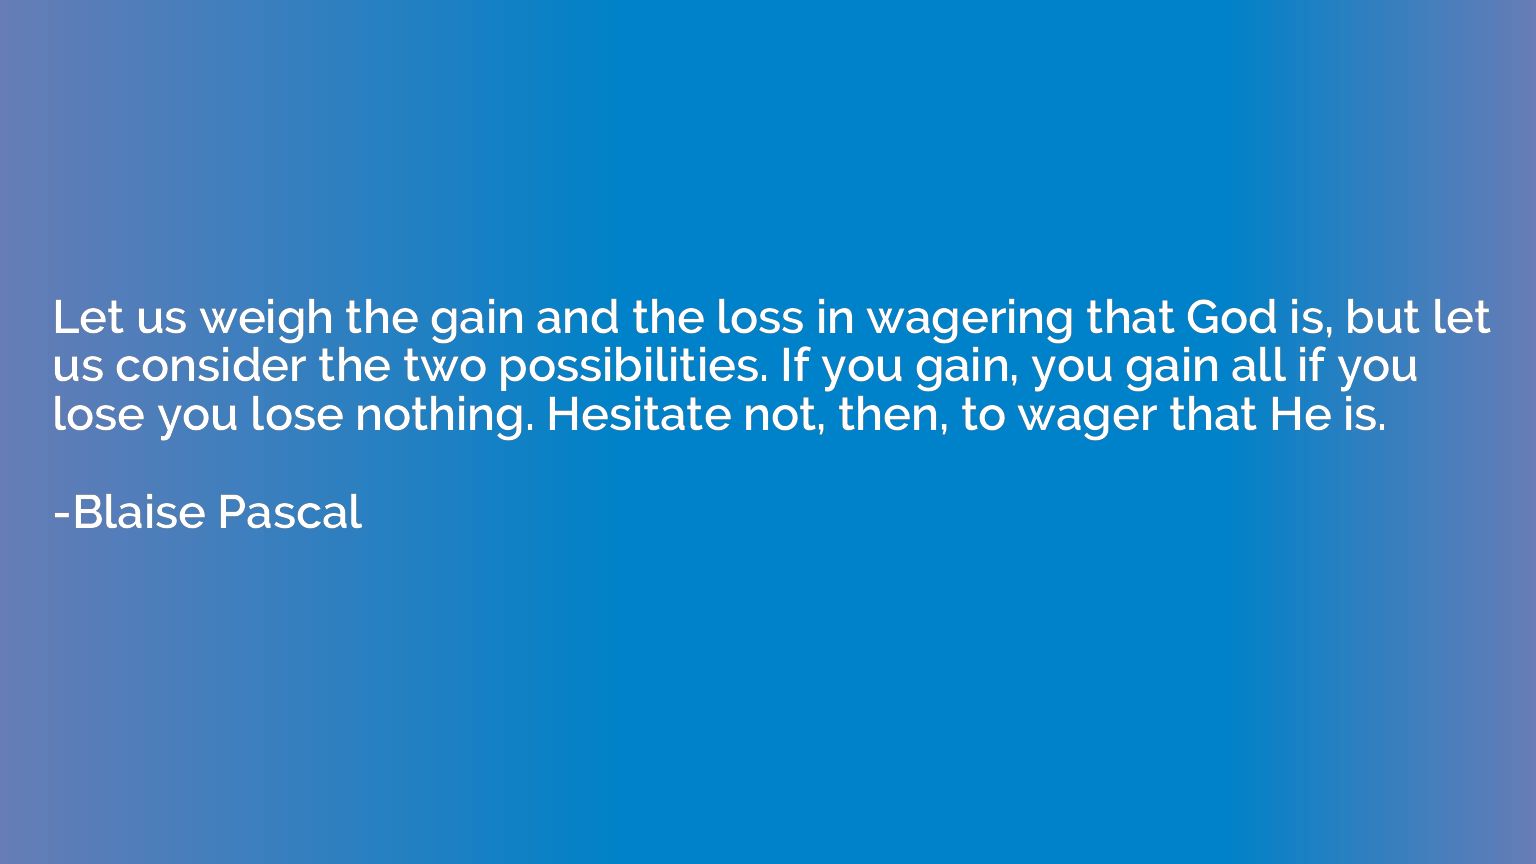 Let us weigh the gain and the loss in wagering that God is, 